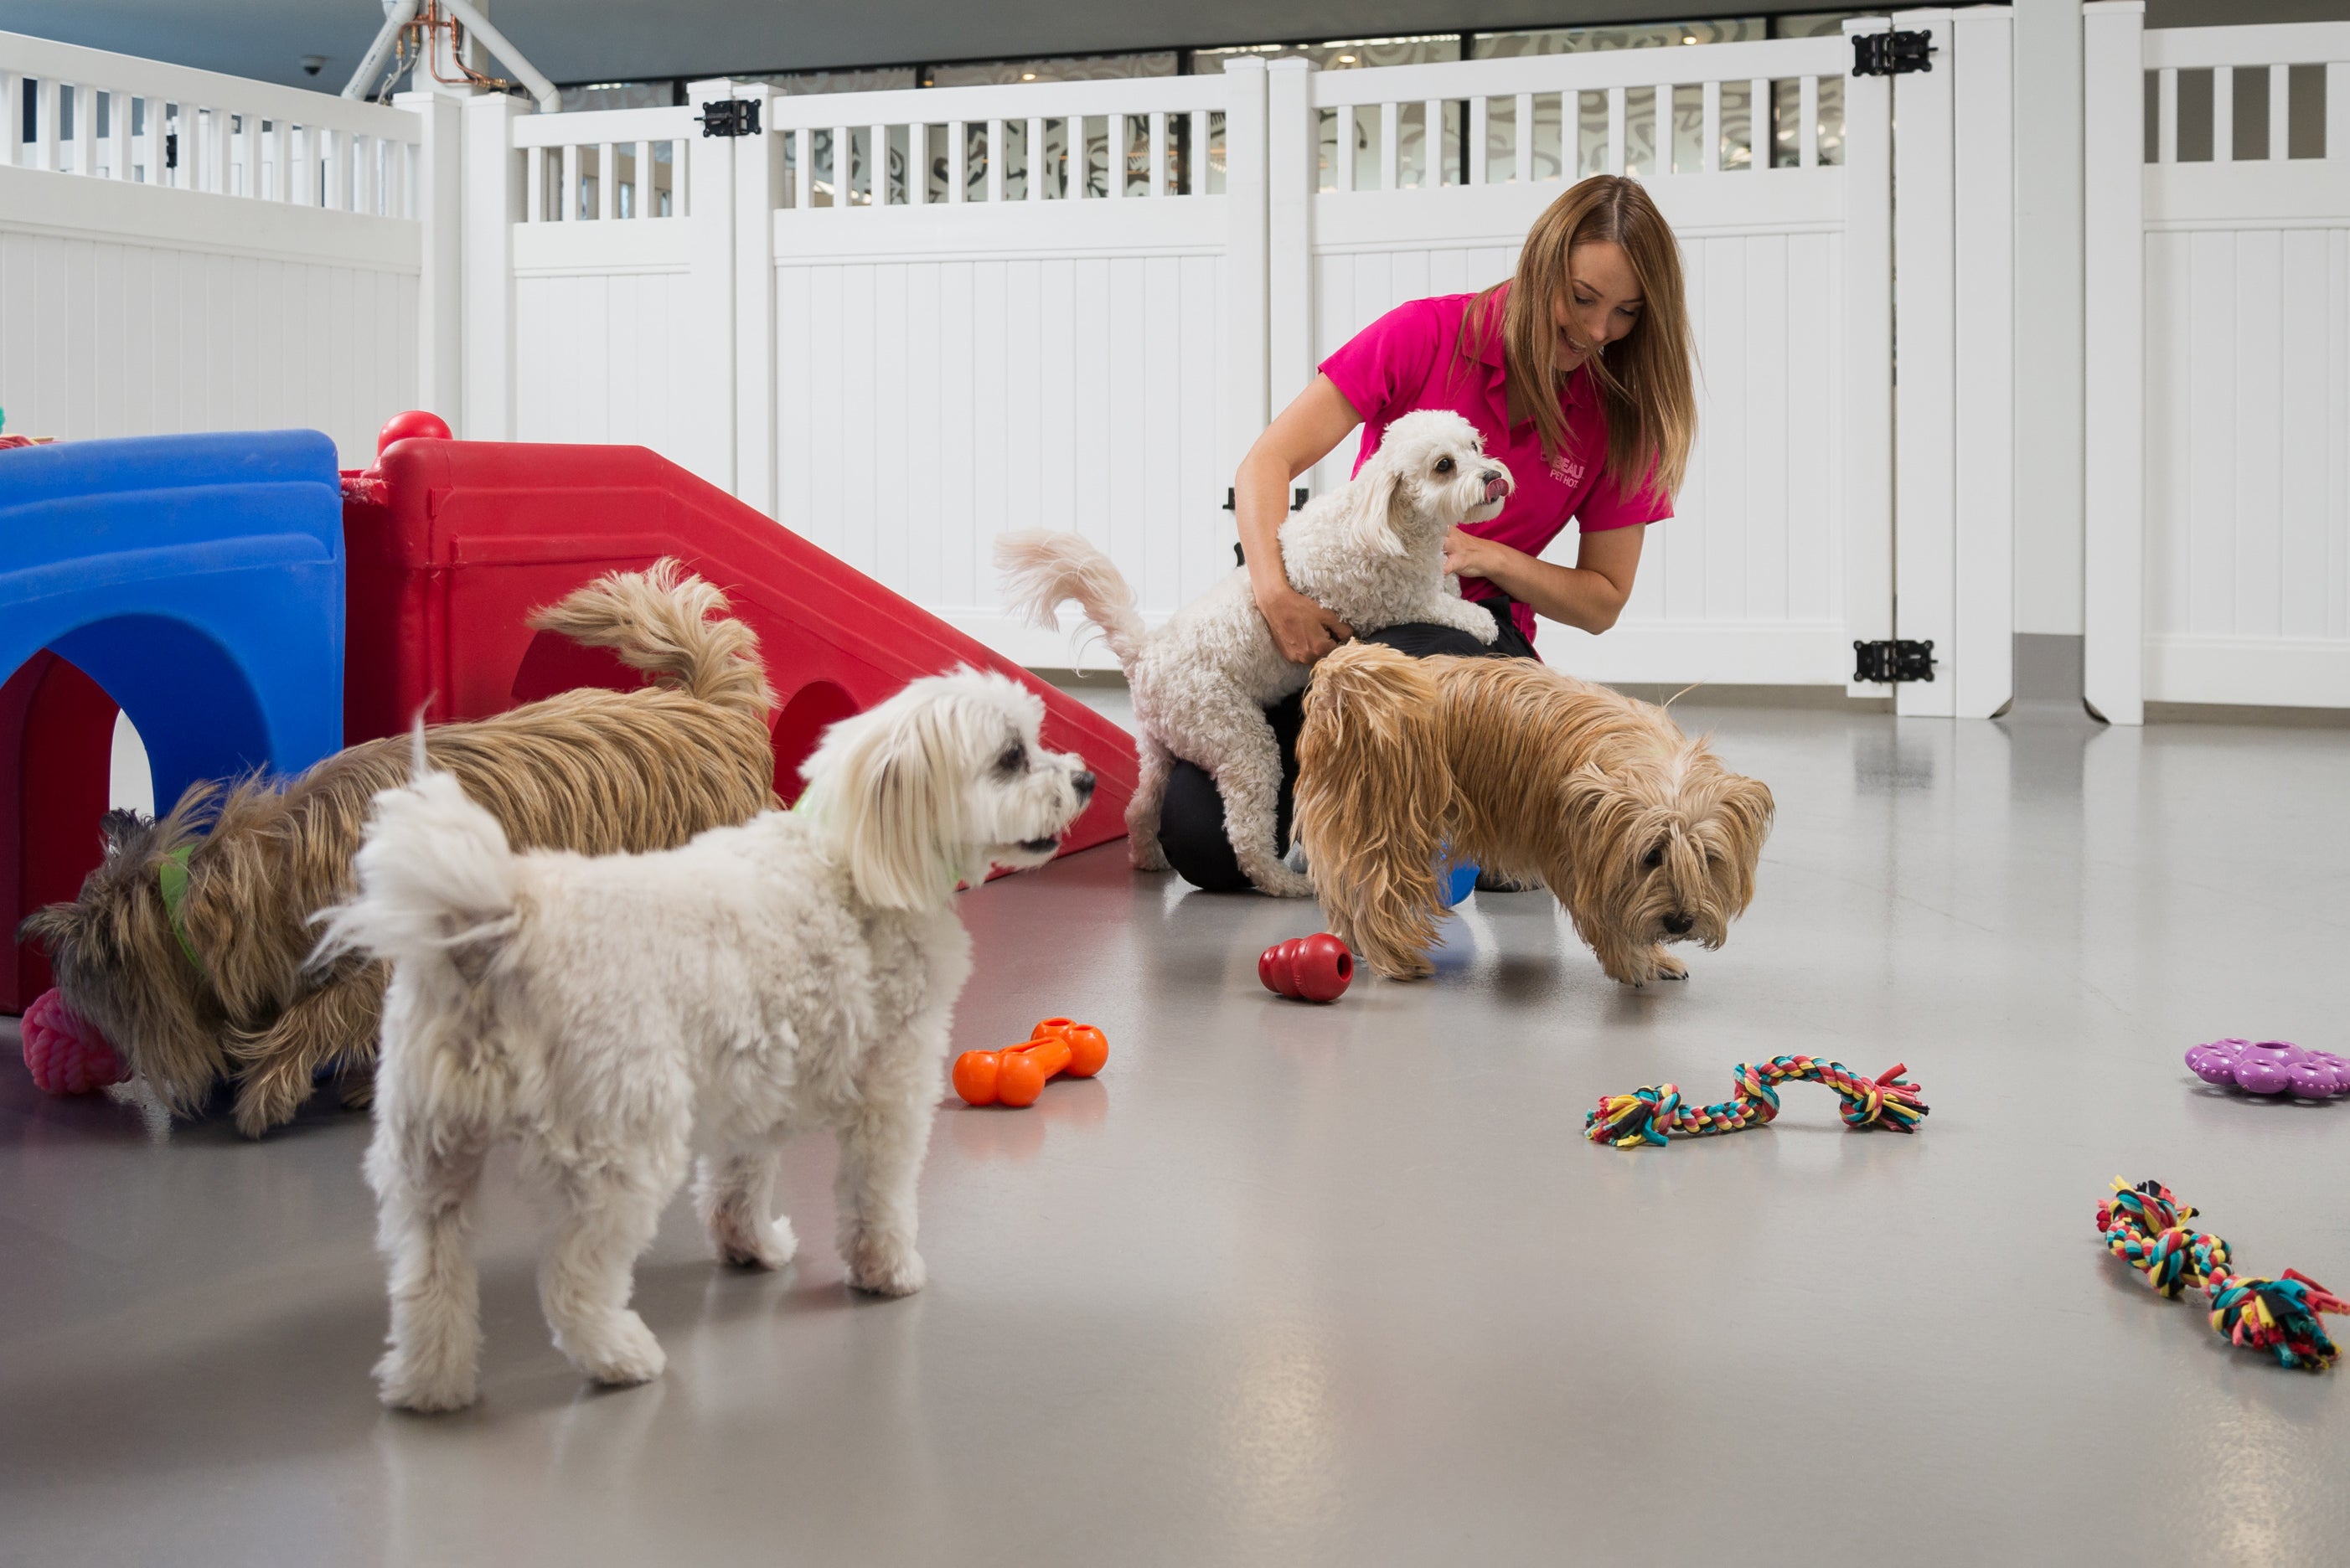 The room size, ventilation, and disinfection measures of licensed pet hotels are regulated, and pets are required to provide vaccination certificates.